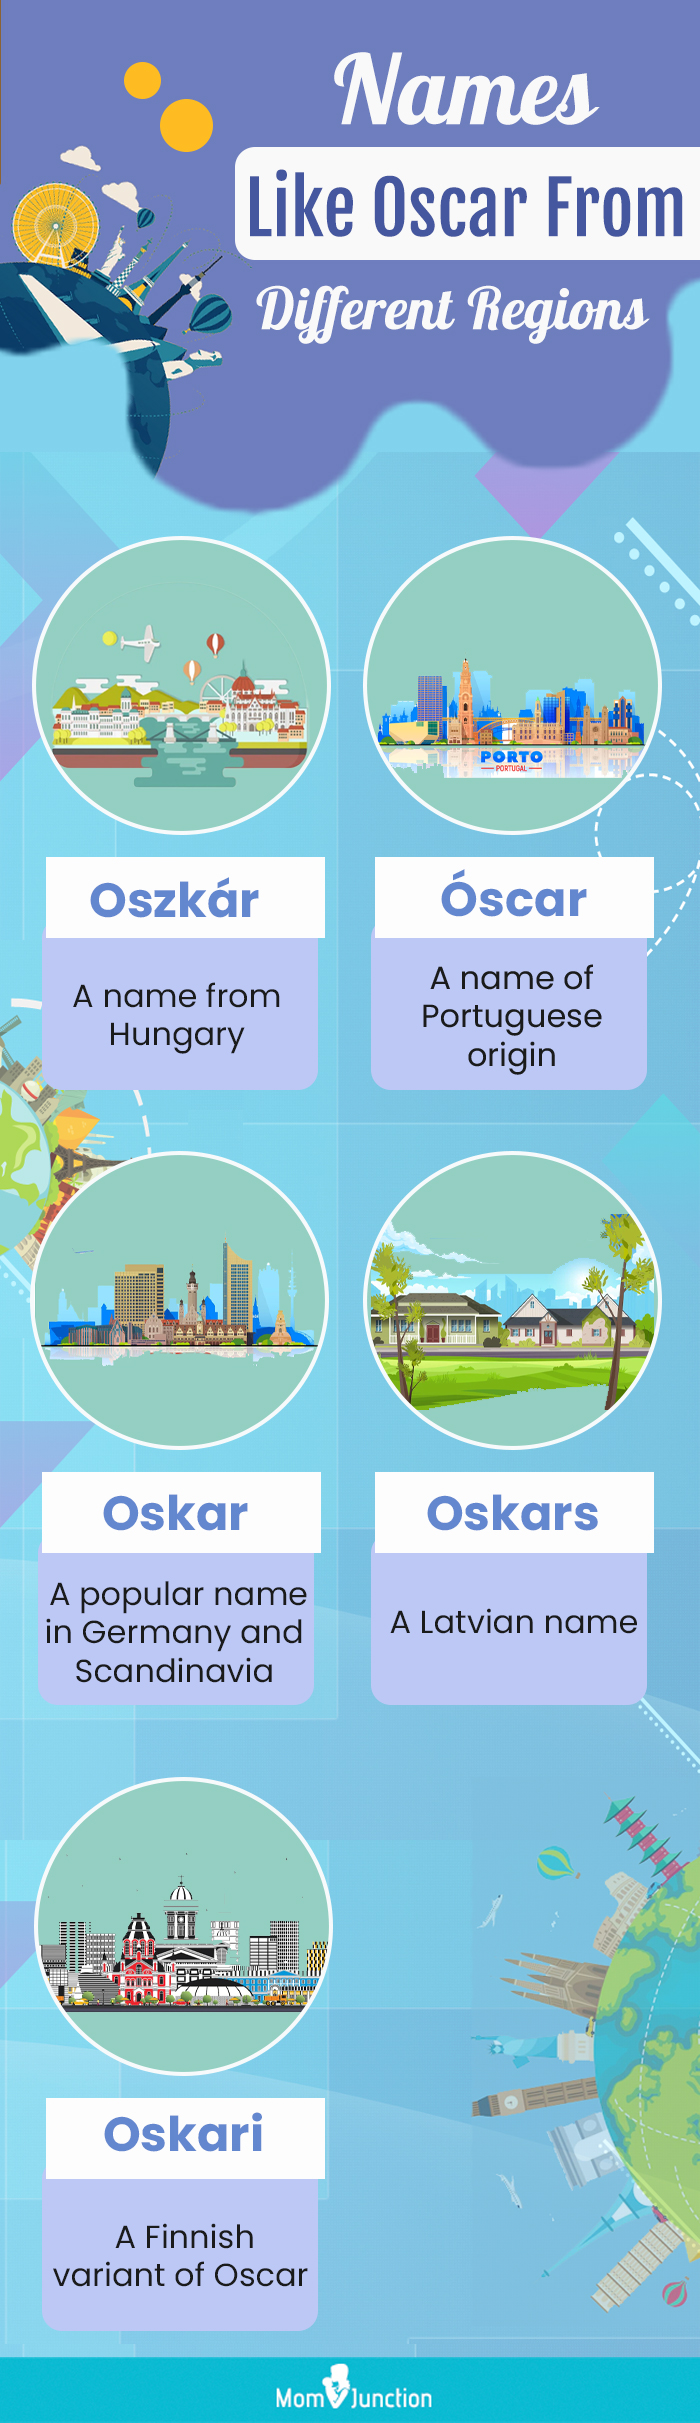 names like oscar from different origins (infographic)